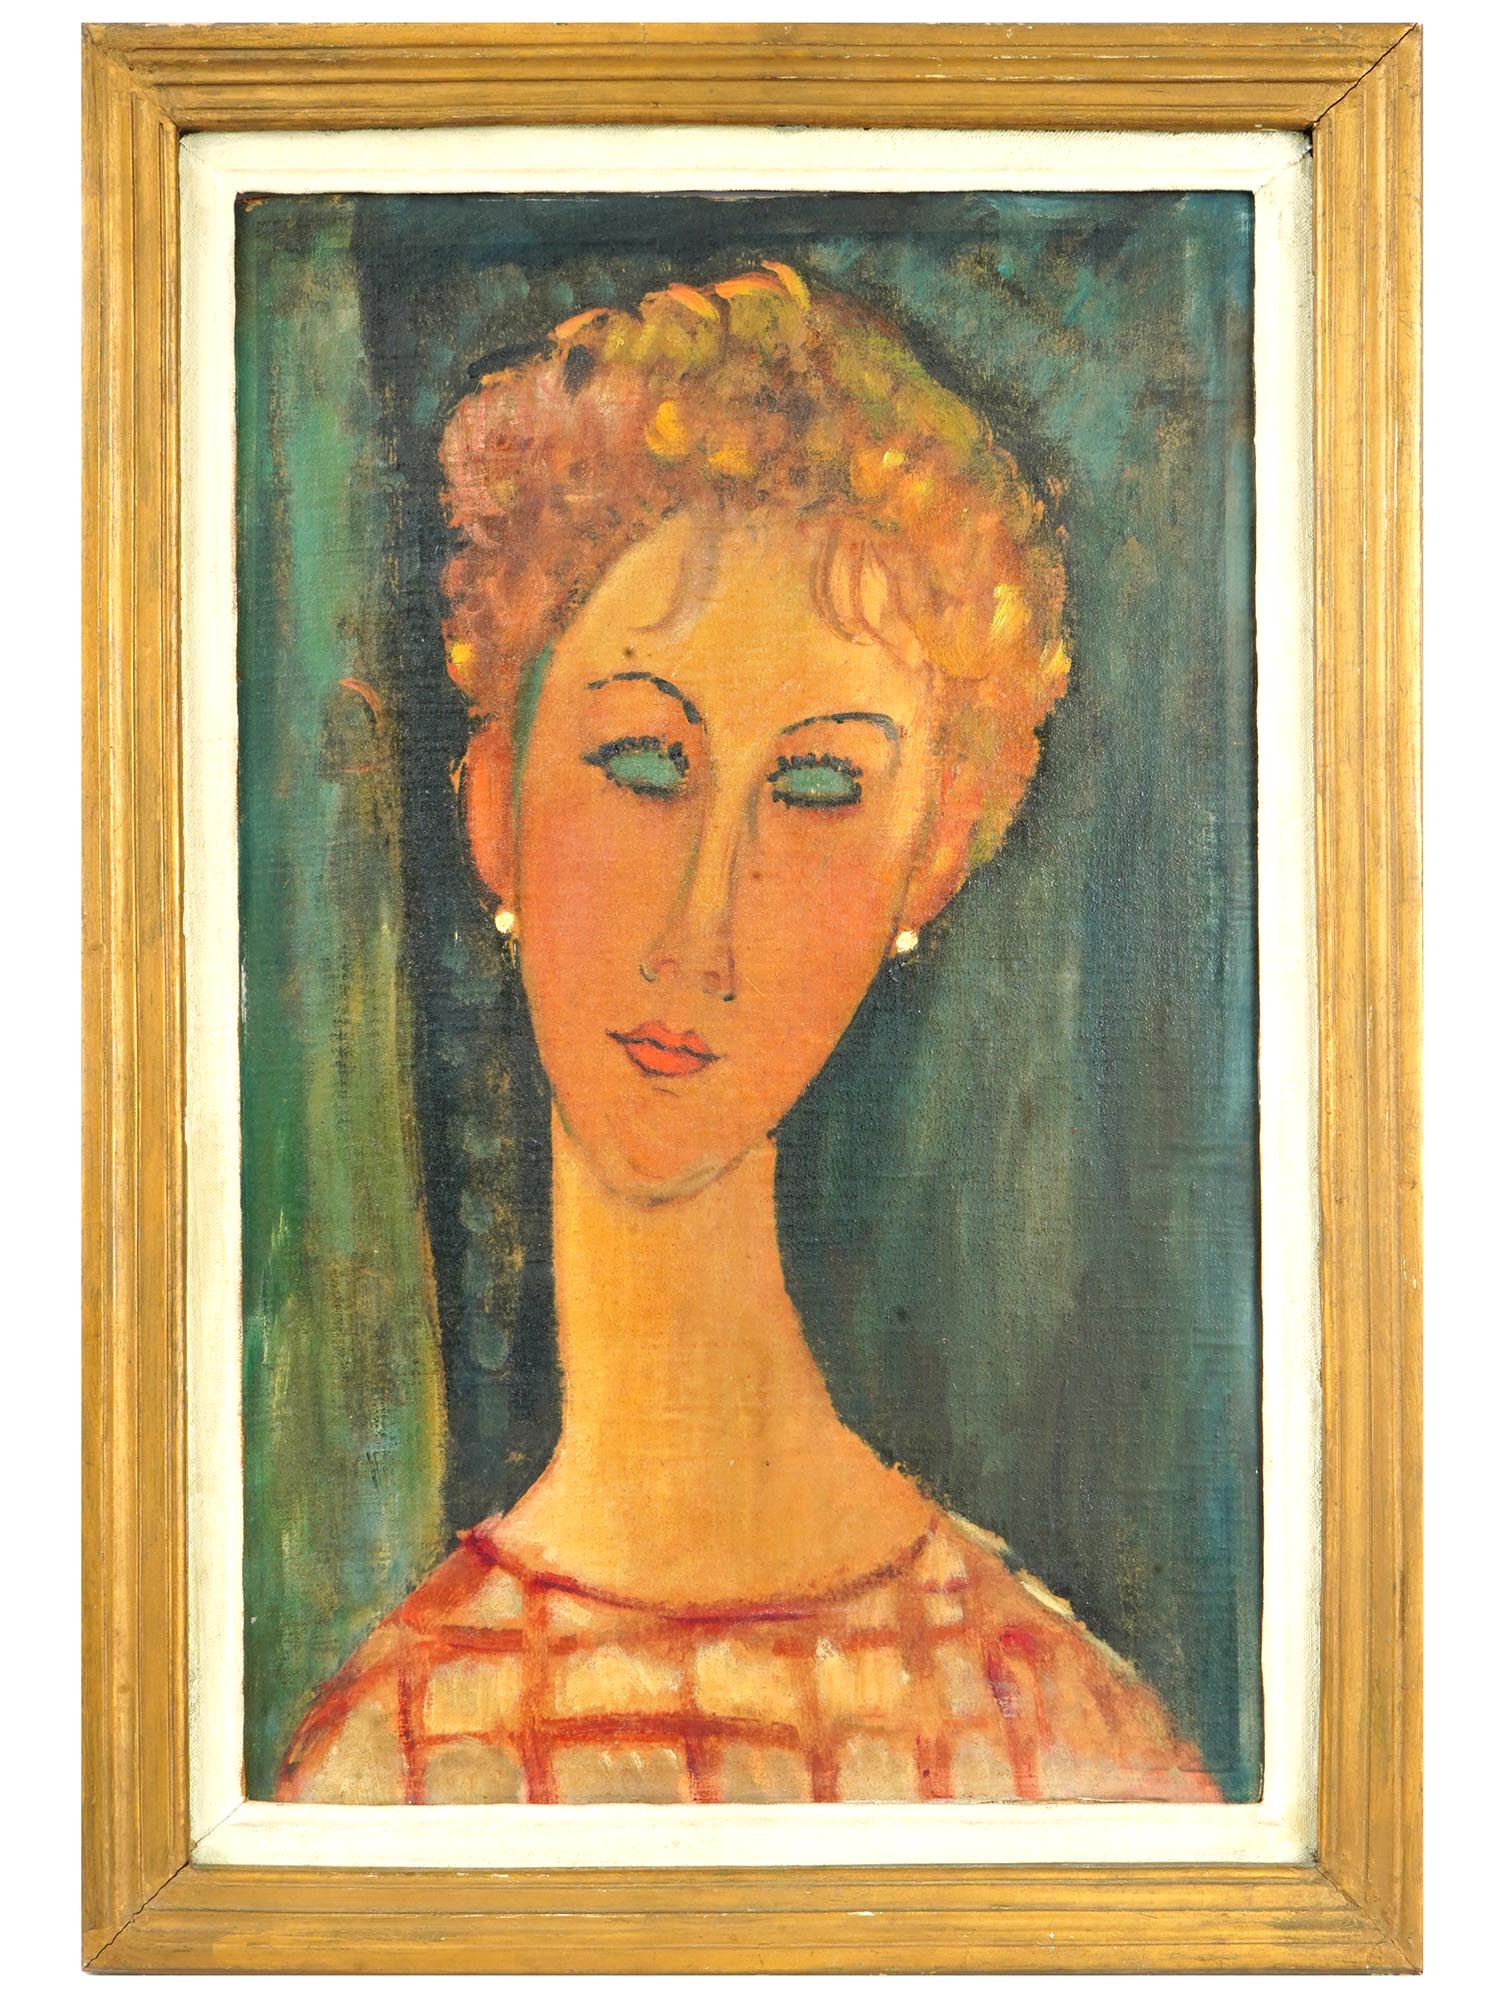 WOMAN PORTRAIT OIL PAINTING AFTER AMEDEO MODIGLIANI PIC-0